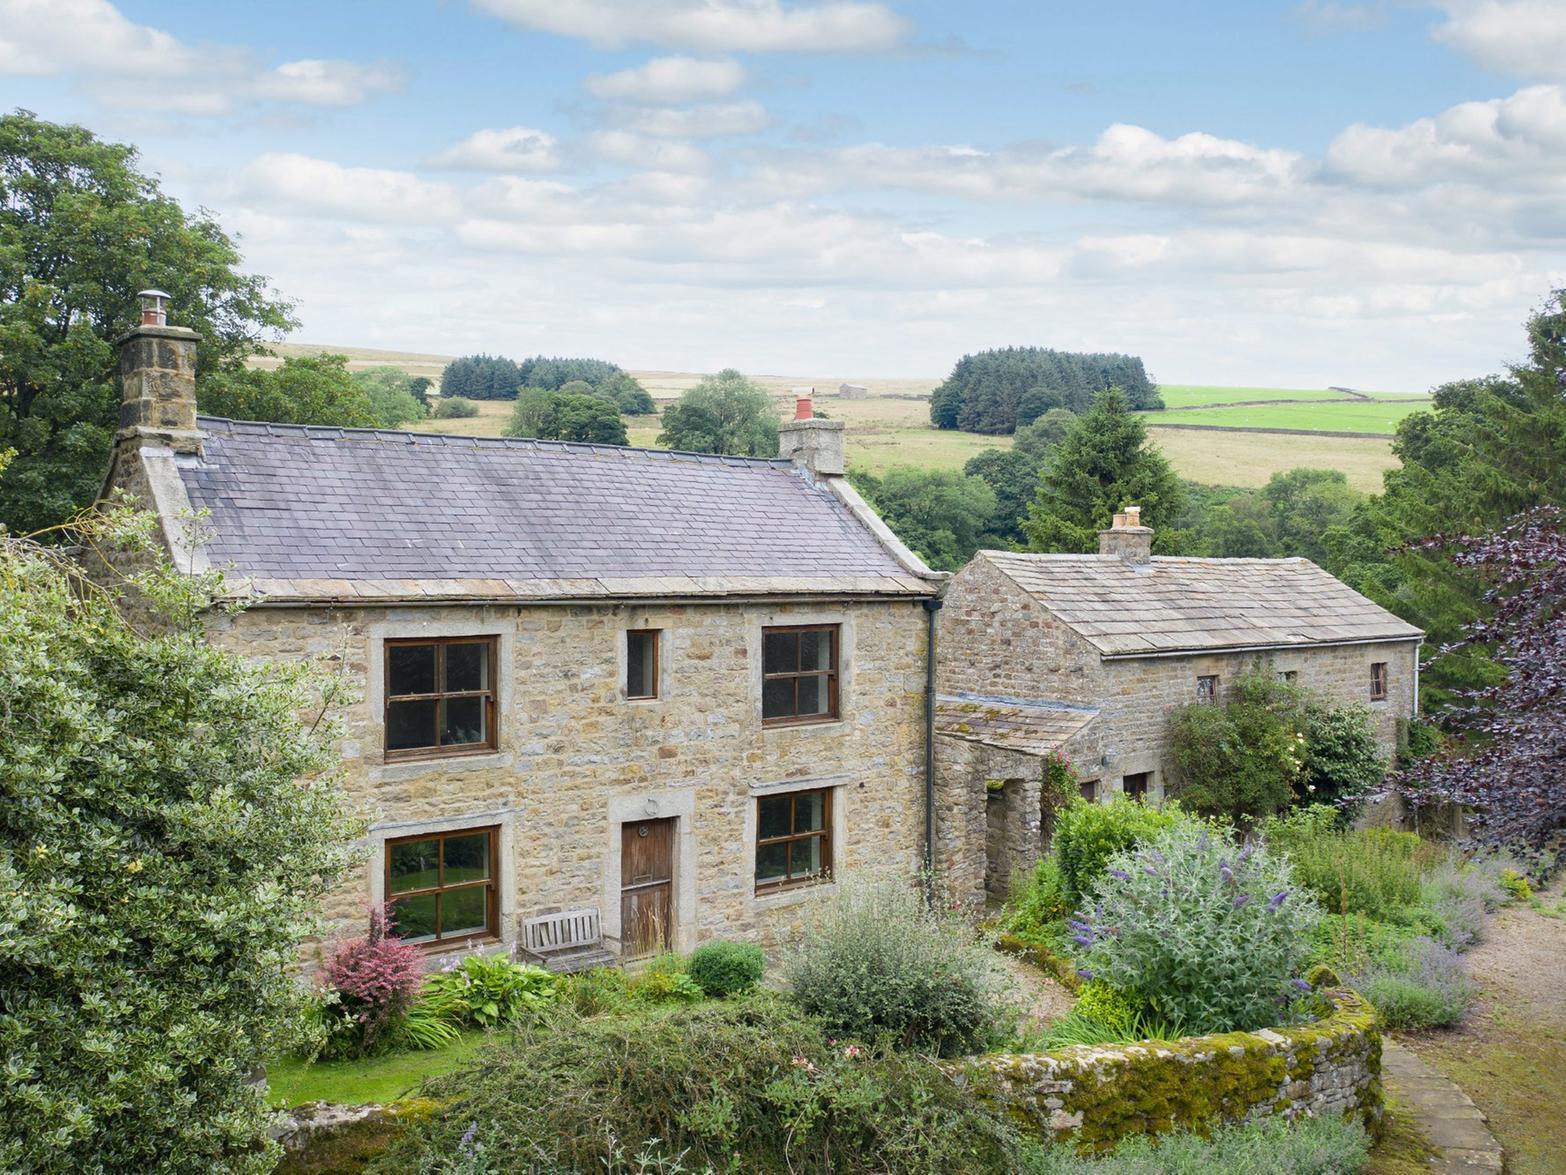 Well House comprises of three substantial stone buildings comprising the original four bedroom farmhouse, an adjacent annexe and a large stone barn, which have significant re-development potential.